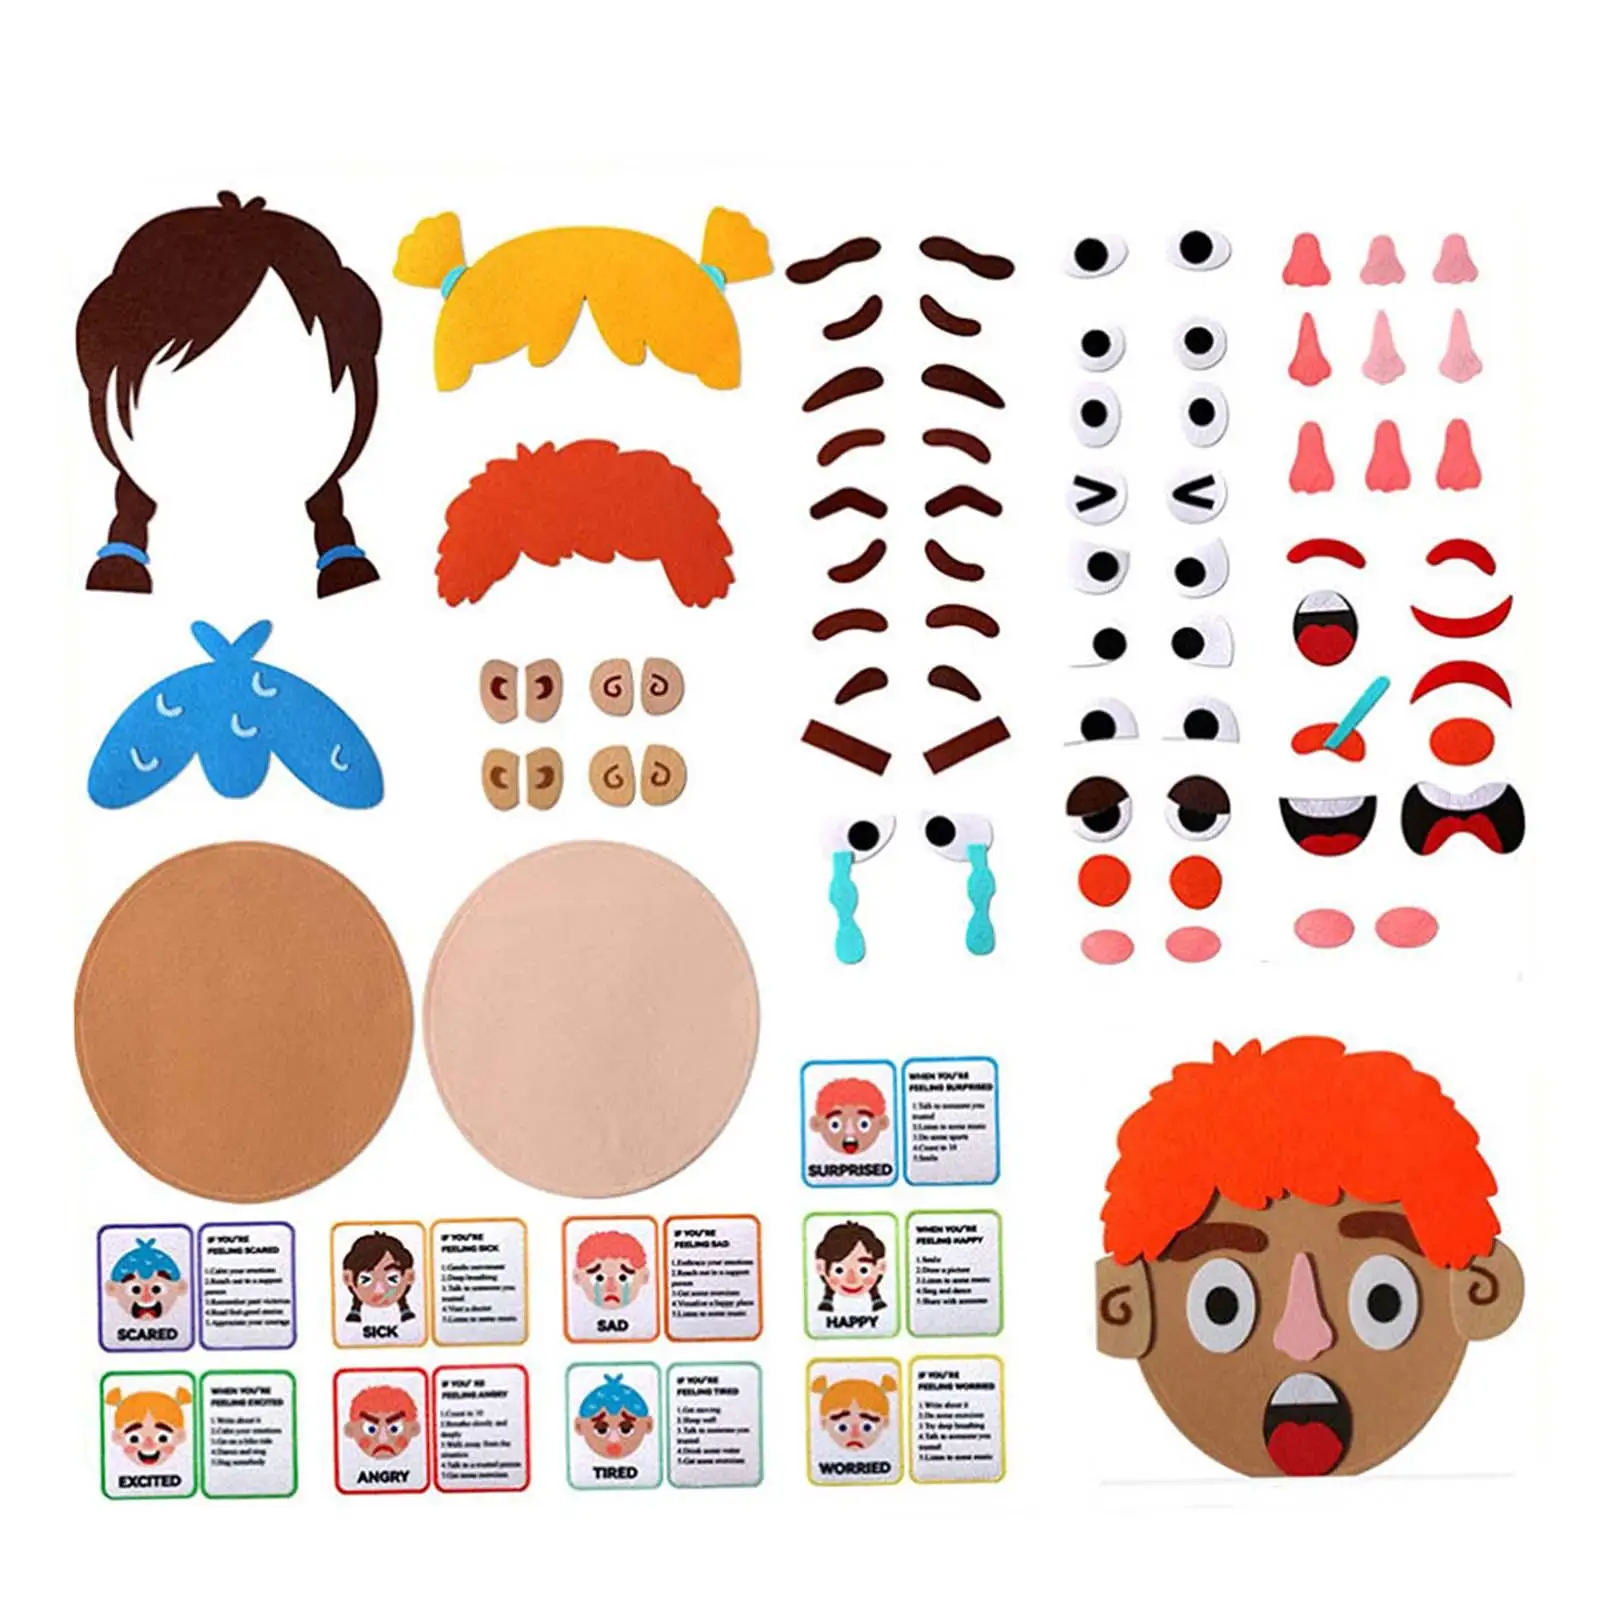 Social Emotional Learning Games for Kids Activities Educational Toy Make A Funny Faces Stickers Games for Boys Children Ages 3+